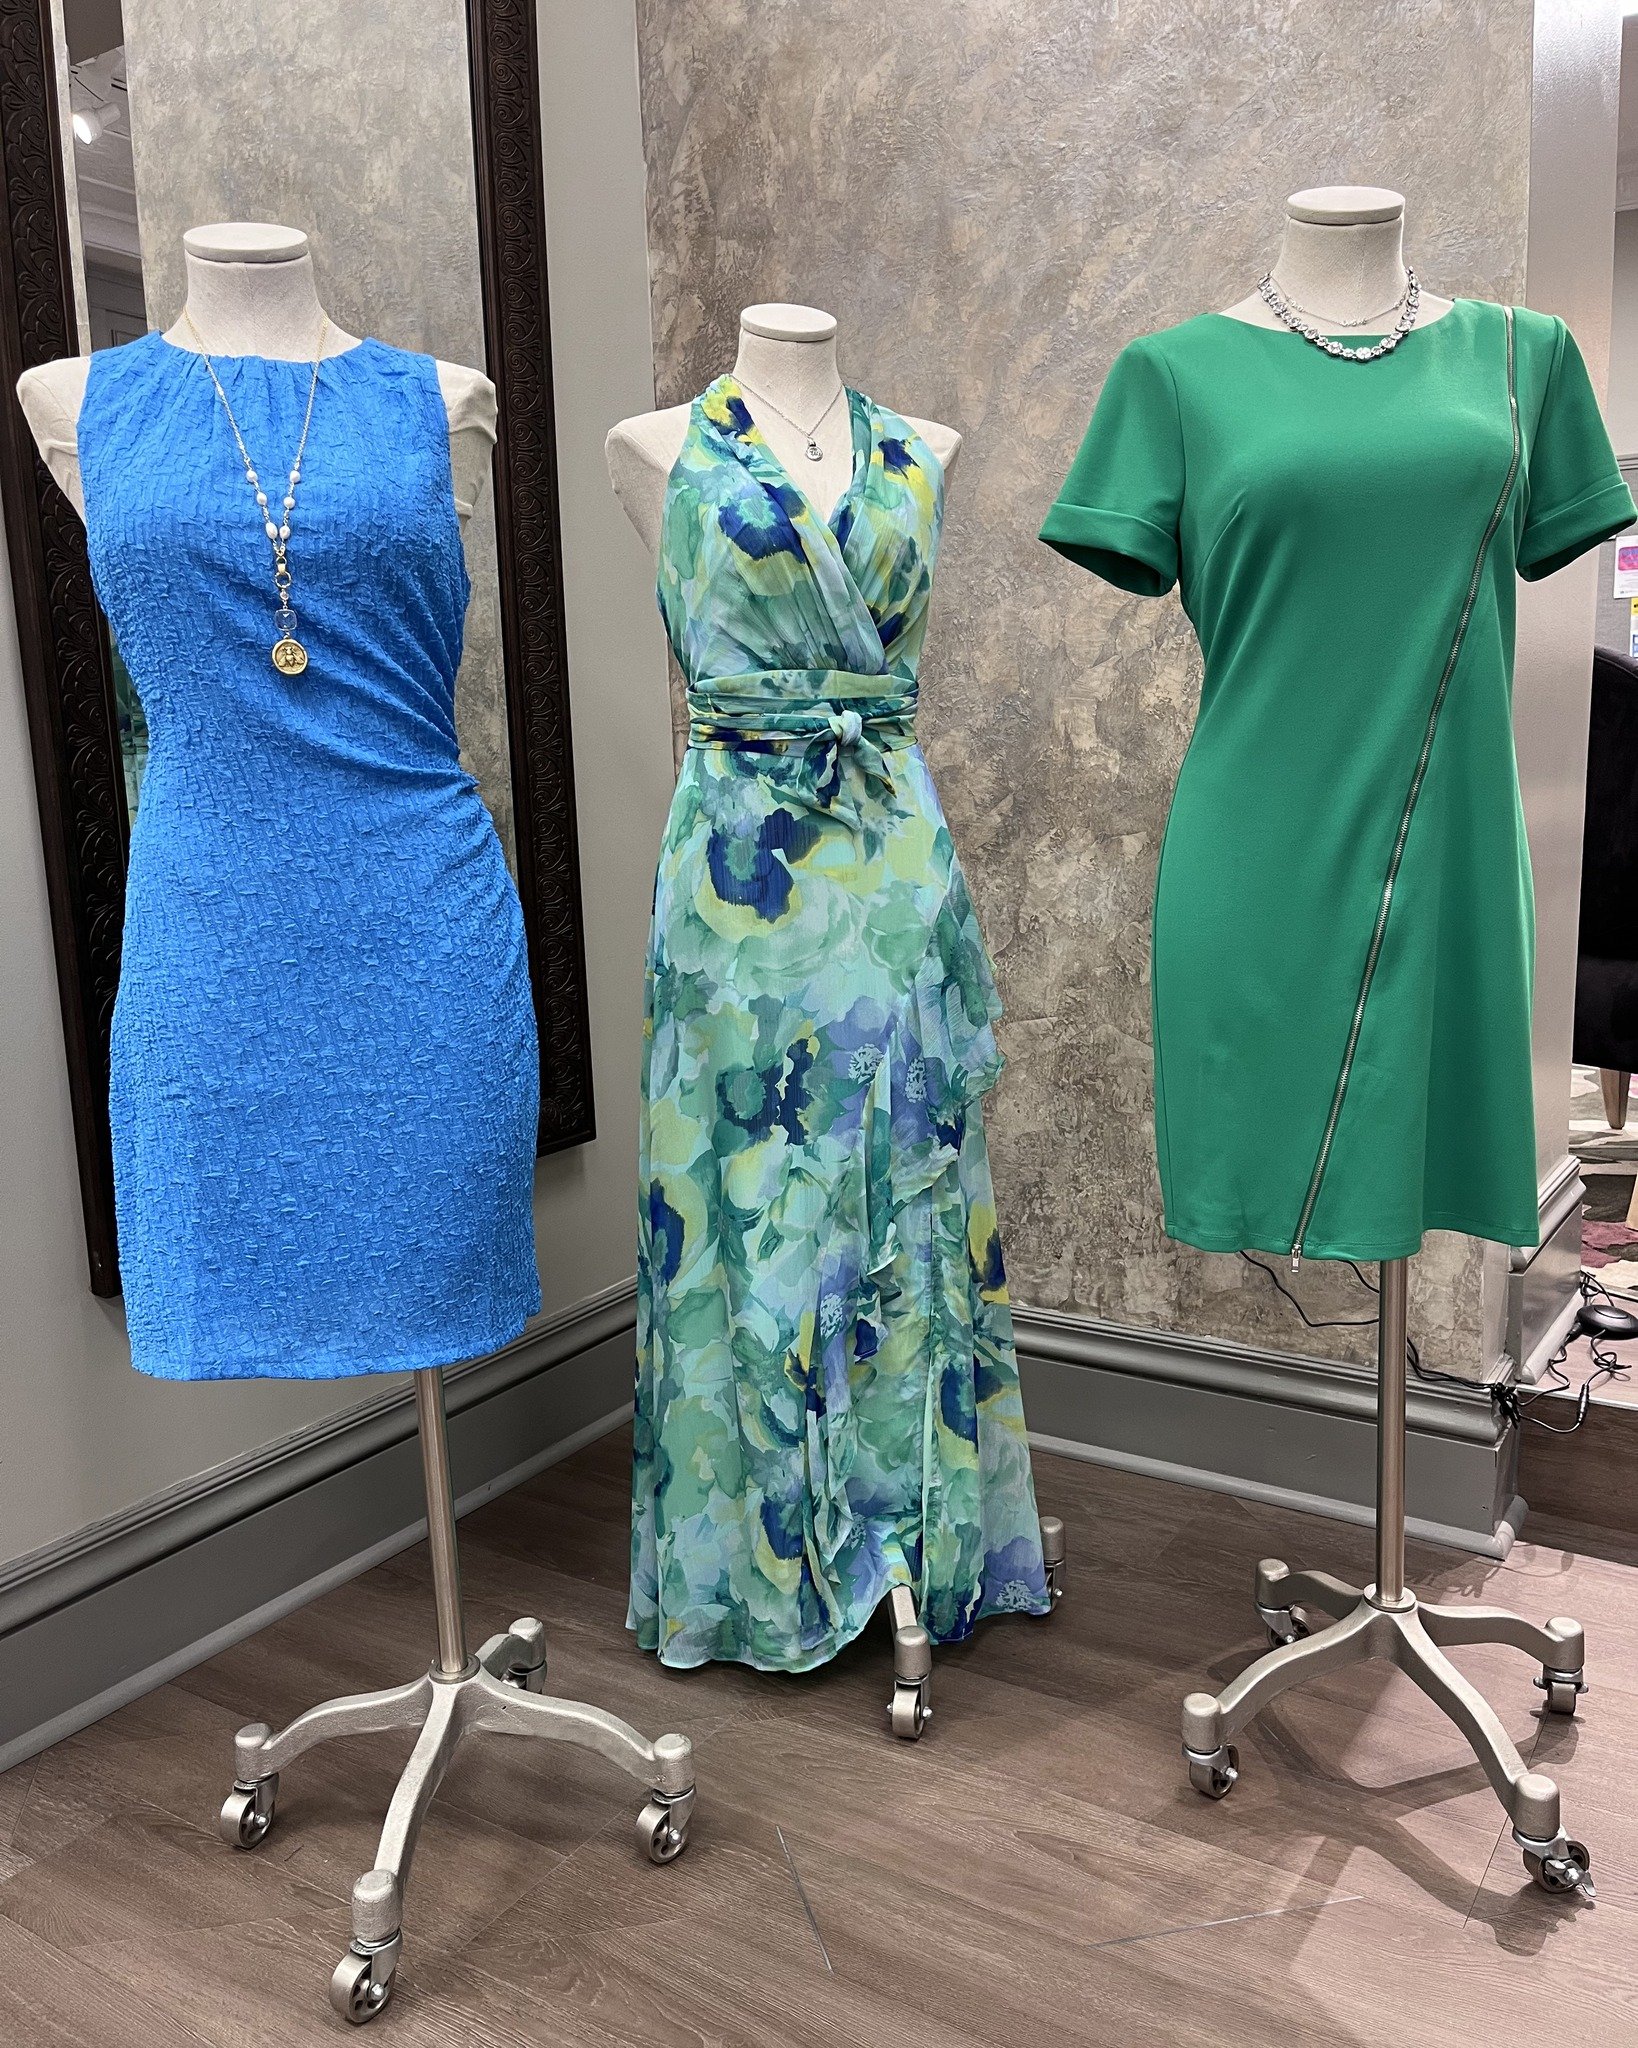 ✅ Vacation-ready 🌴🕶️
✅ Wedding-ready 💍👰
✅ Graduation-ready 🎓
✅ Bridal &amp; Baby Shower-ready 🎁🍼

From casual to dressy, classic to unique, we've got stylish dresses for every event on your calendar! #terianns #livelovemov #thinkfashion #dress